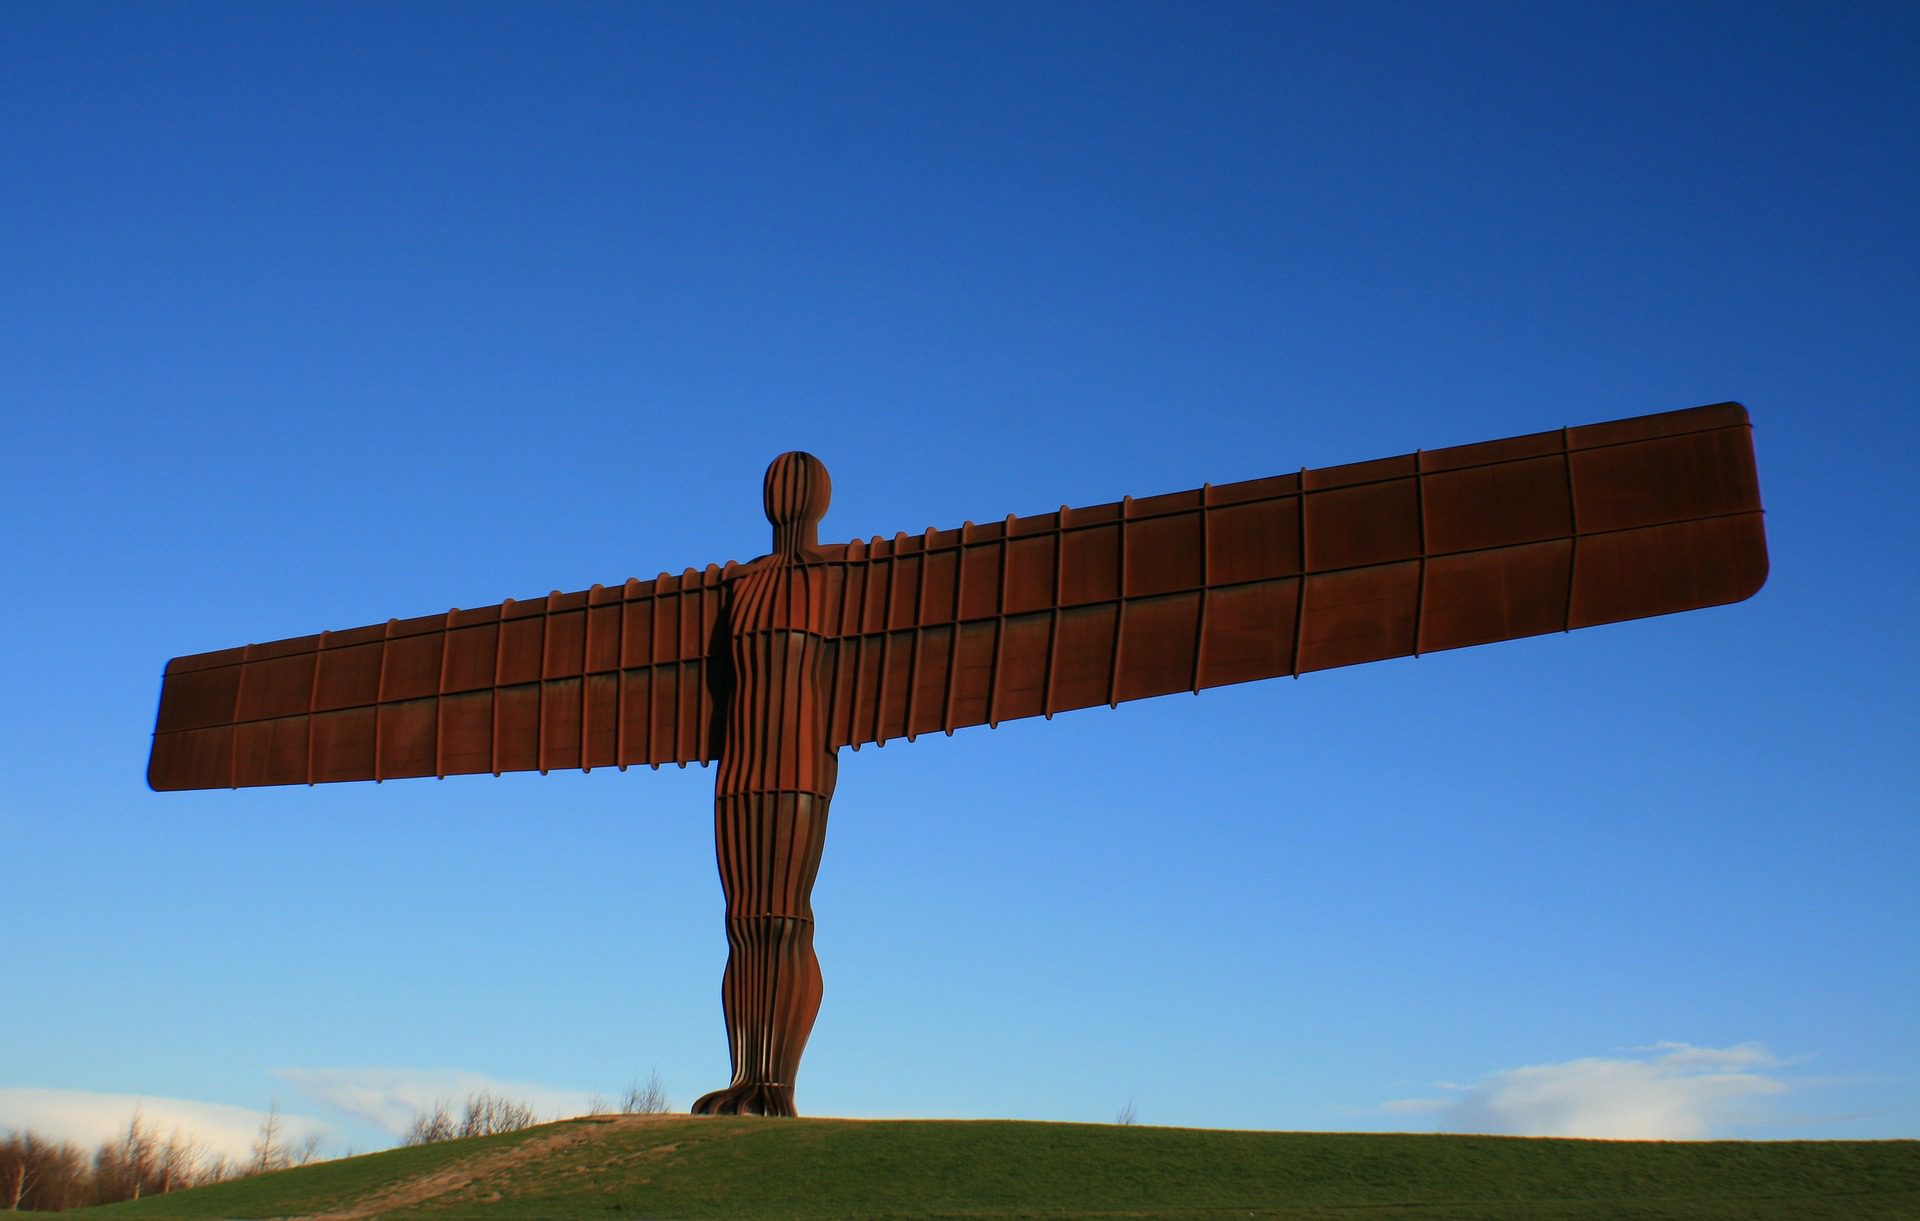 The Angel of the North against a bright, blue sky